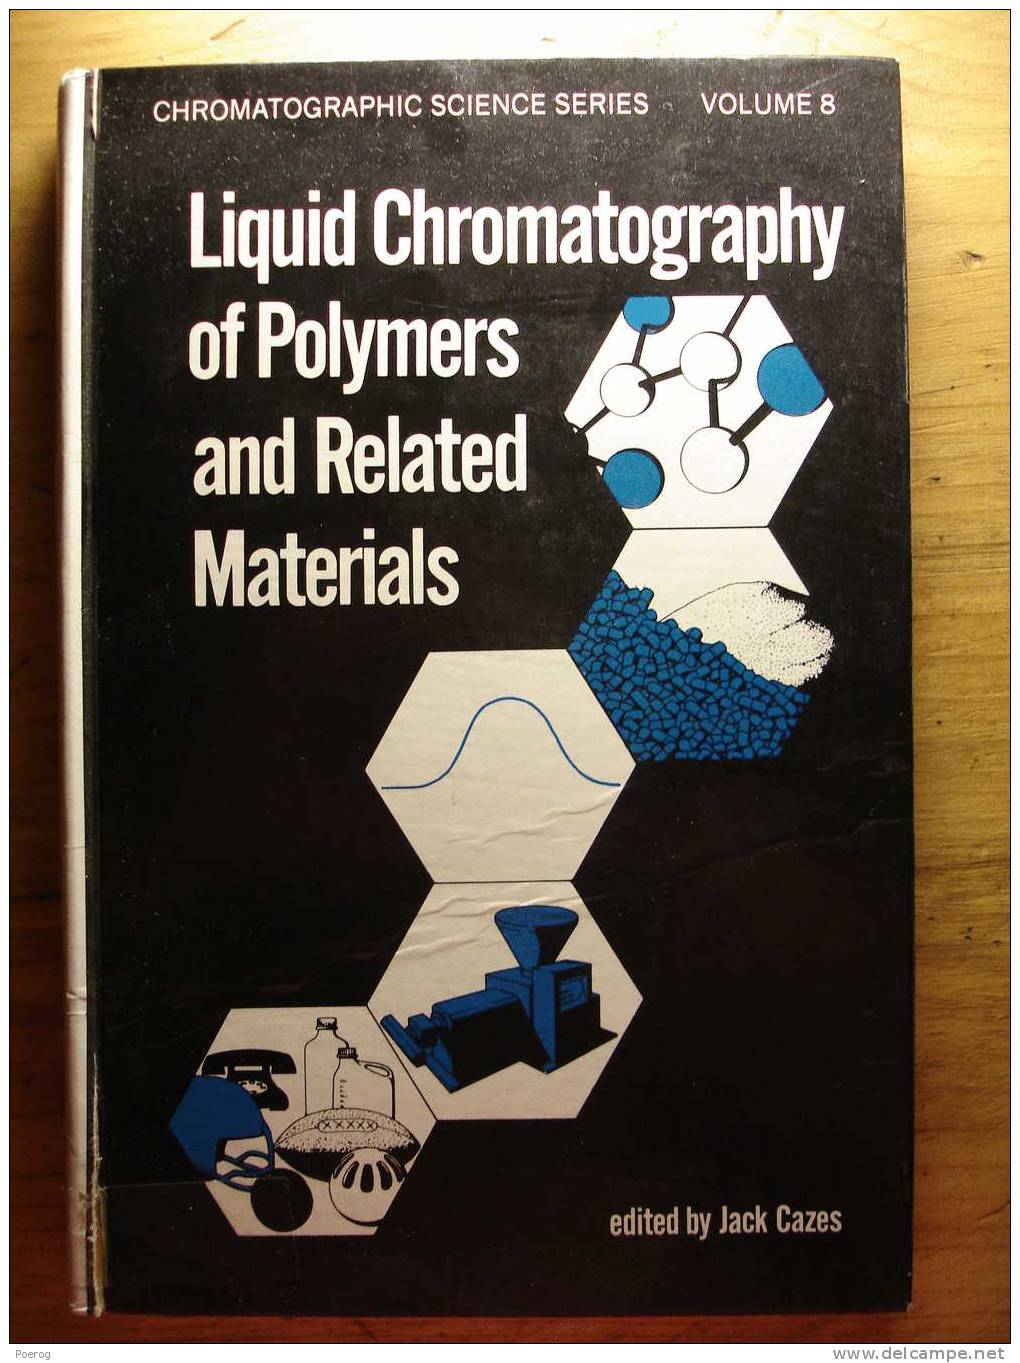 LIQUID CHROMATOGRAPHY OF POLYMERS AND RELATED MATERIALS By JACK CAZES - DEKKER NEW YORK 1977 - Chemie